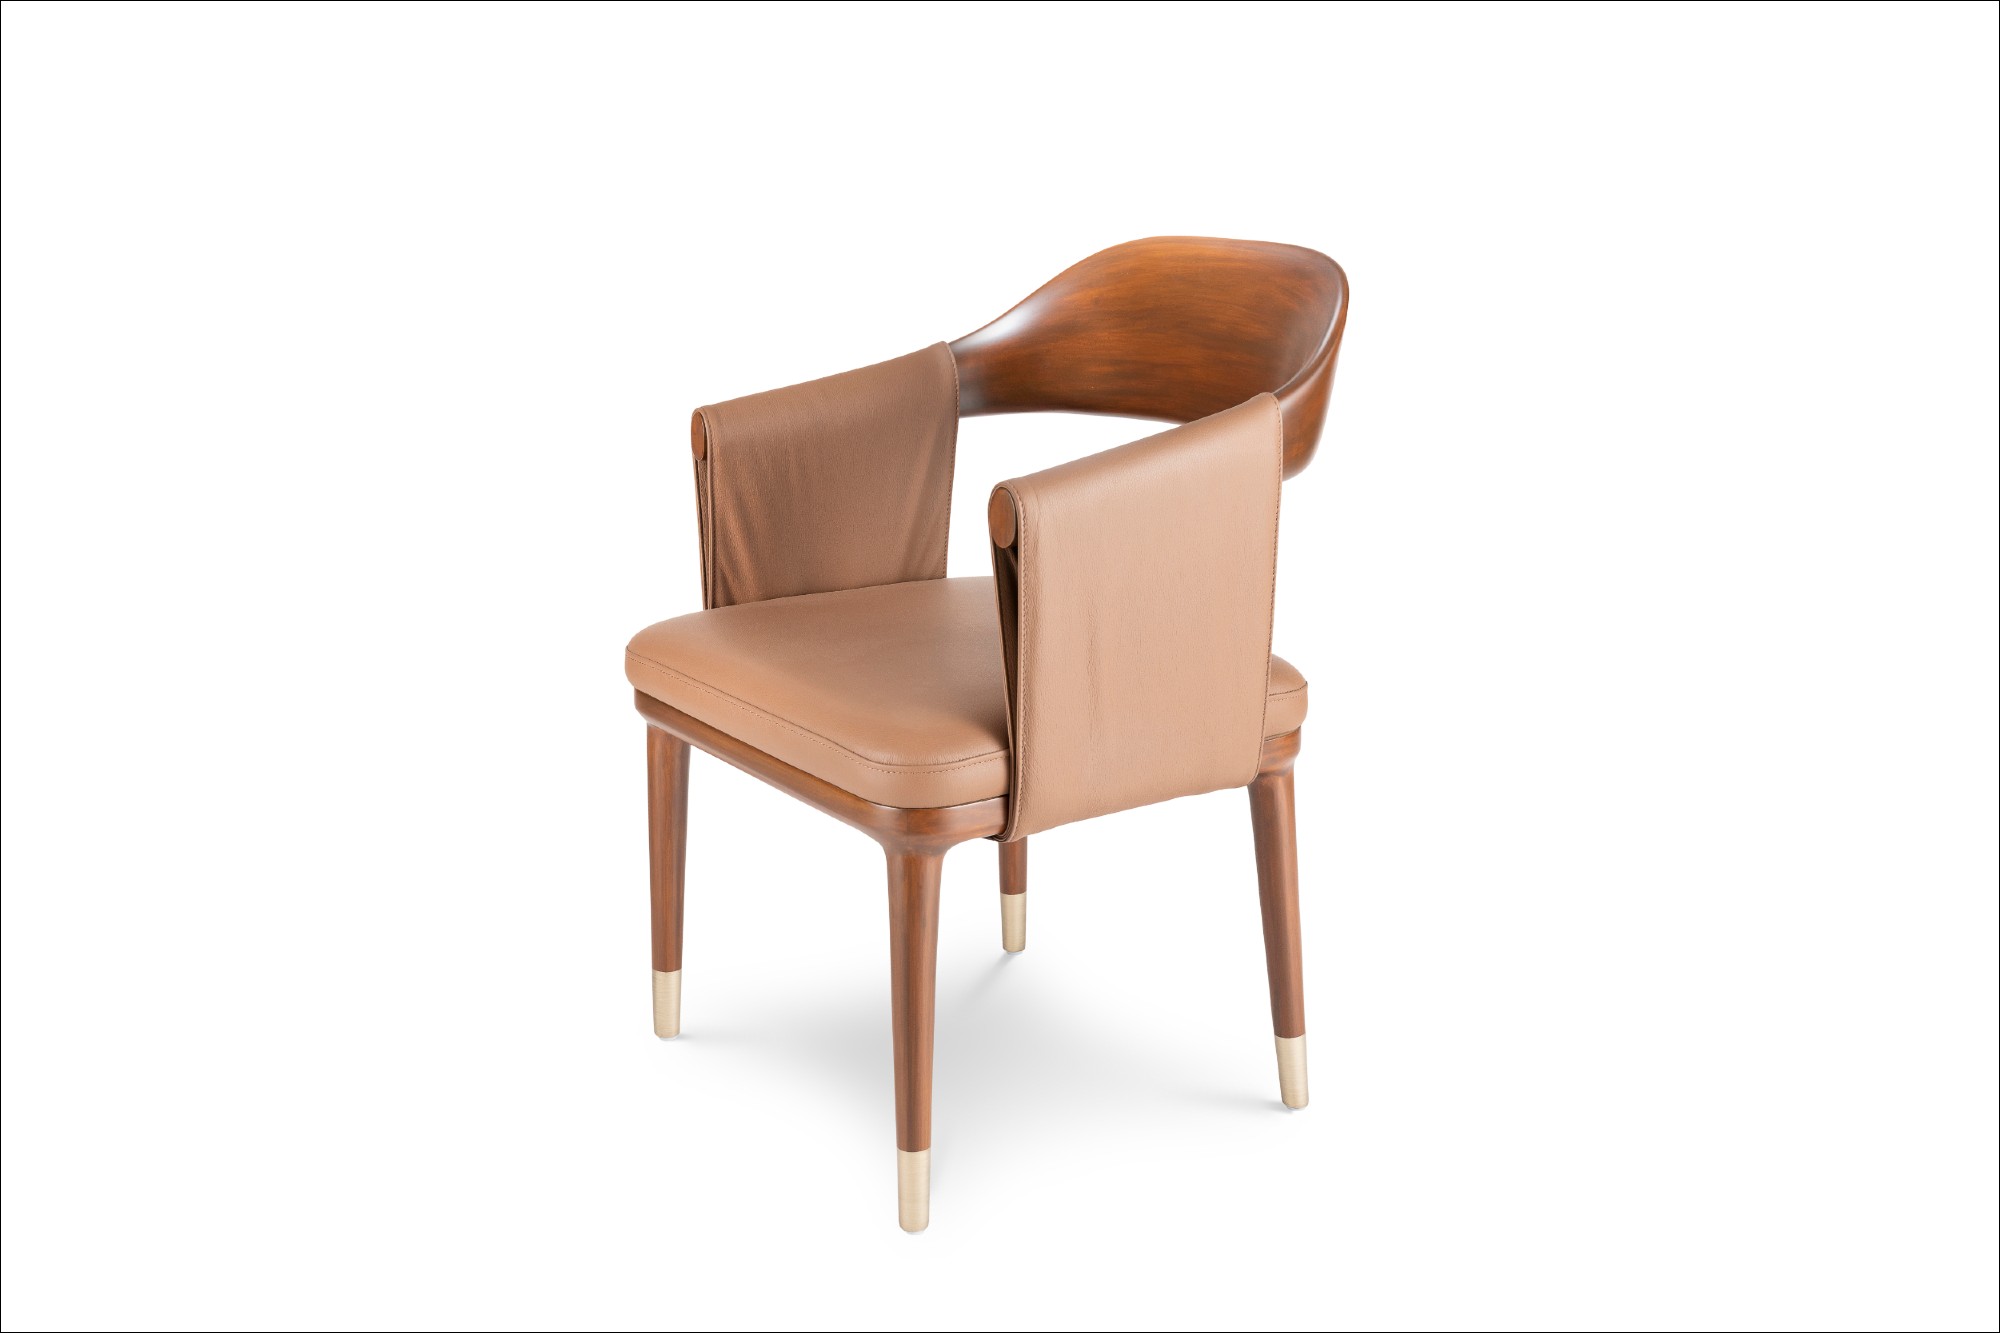 Ochre At Home launches chair collection